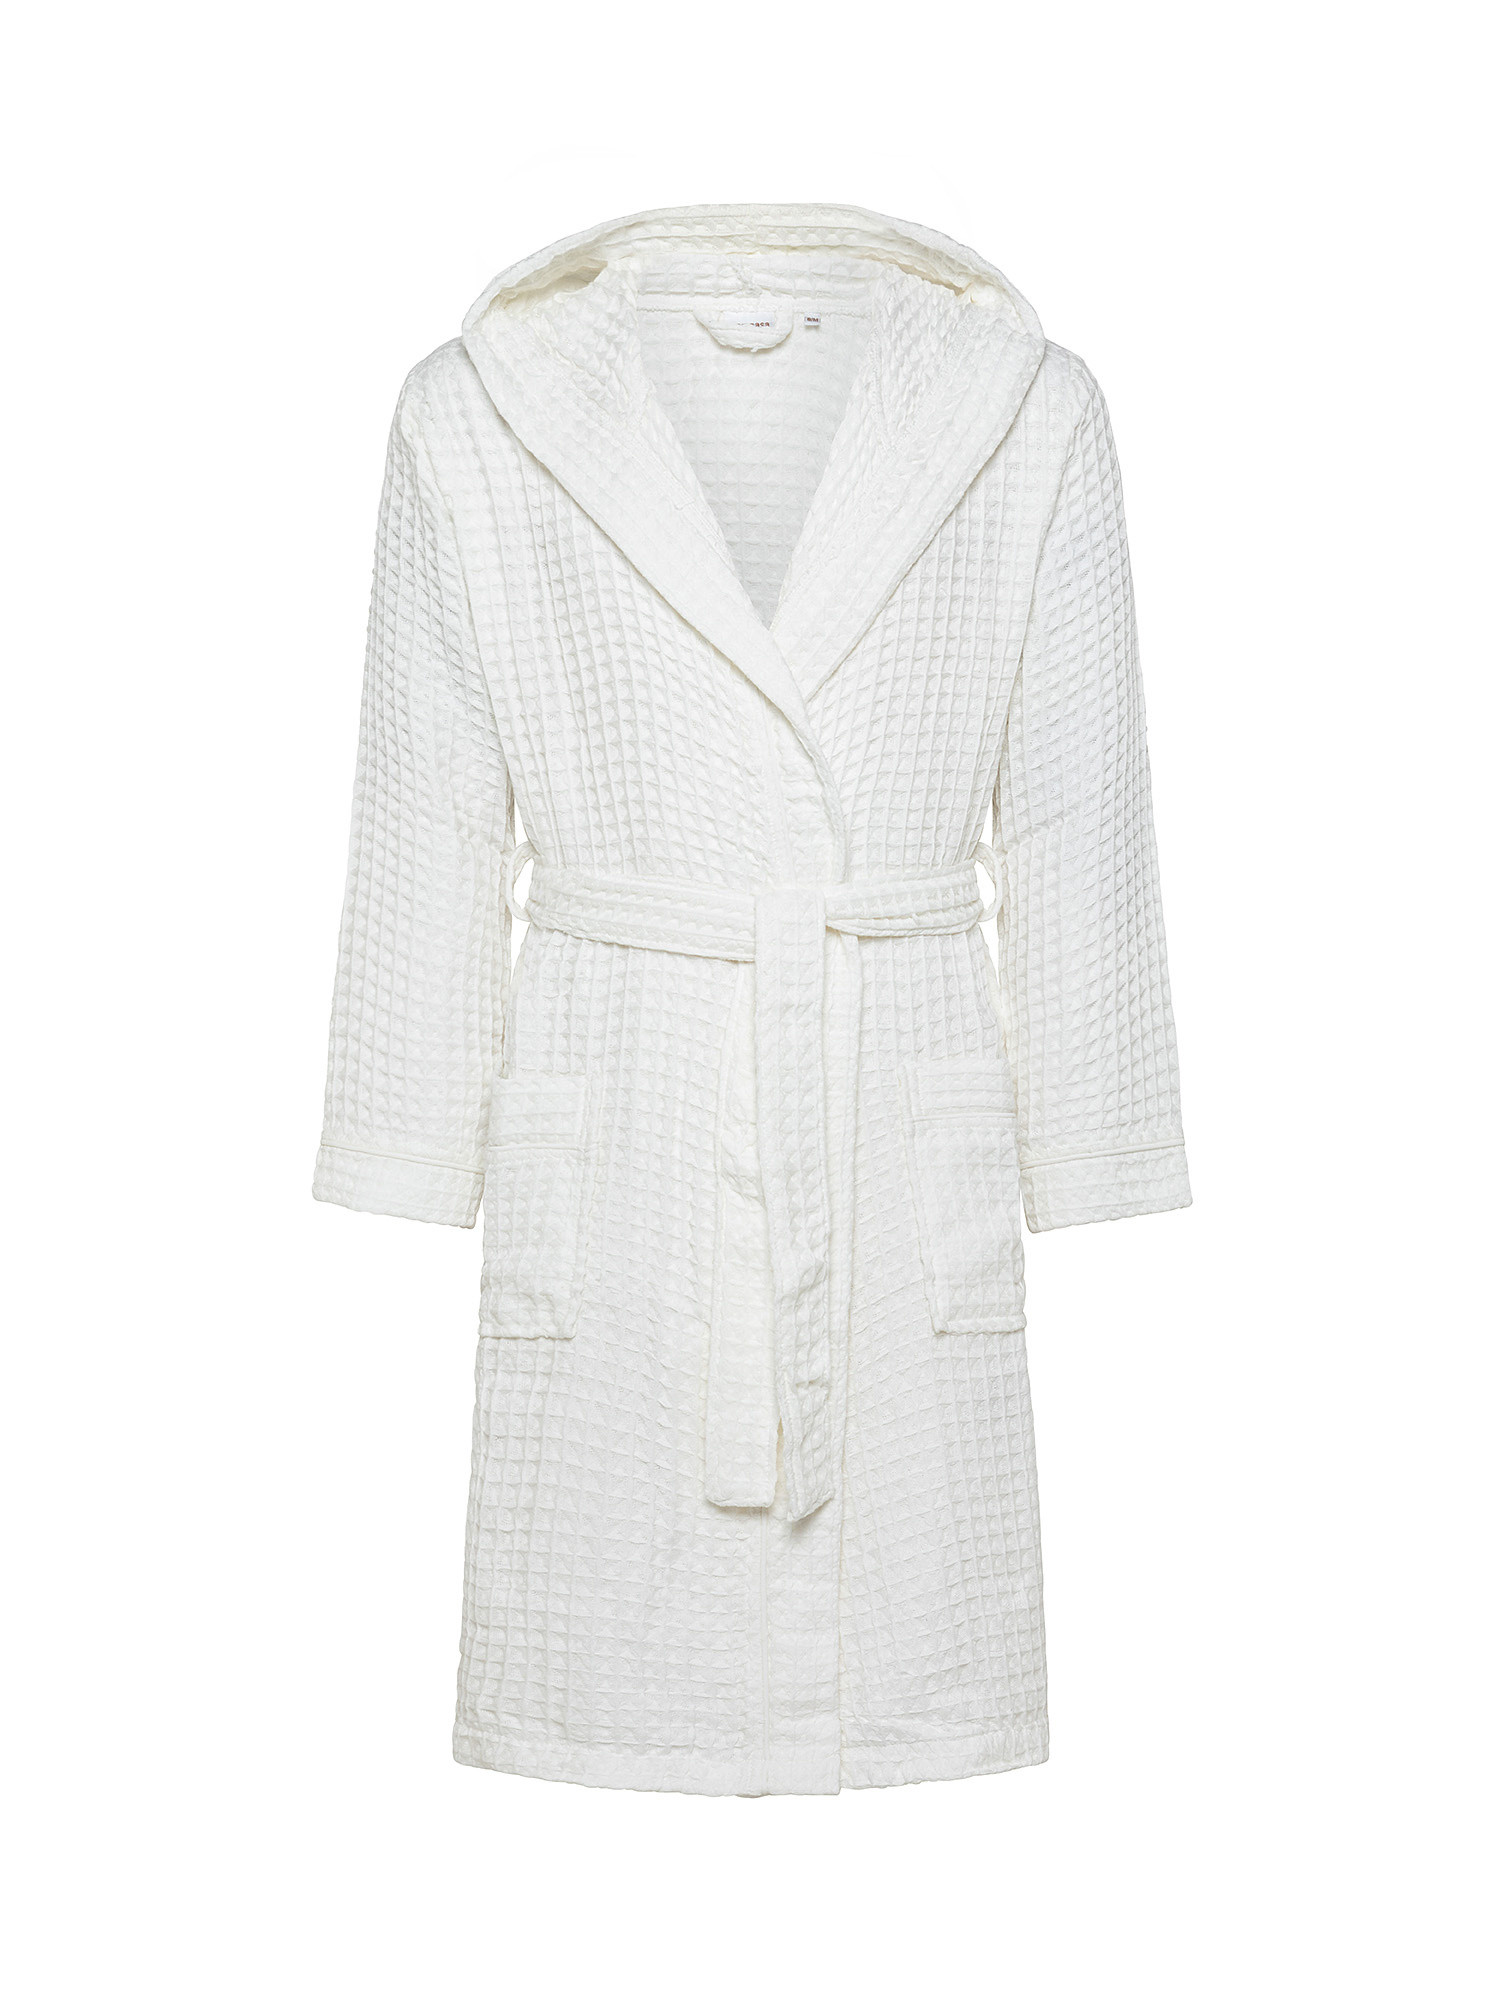 Solid color honeycomb cotton bathrobe, White, large image number 0